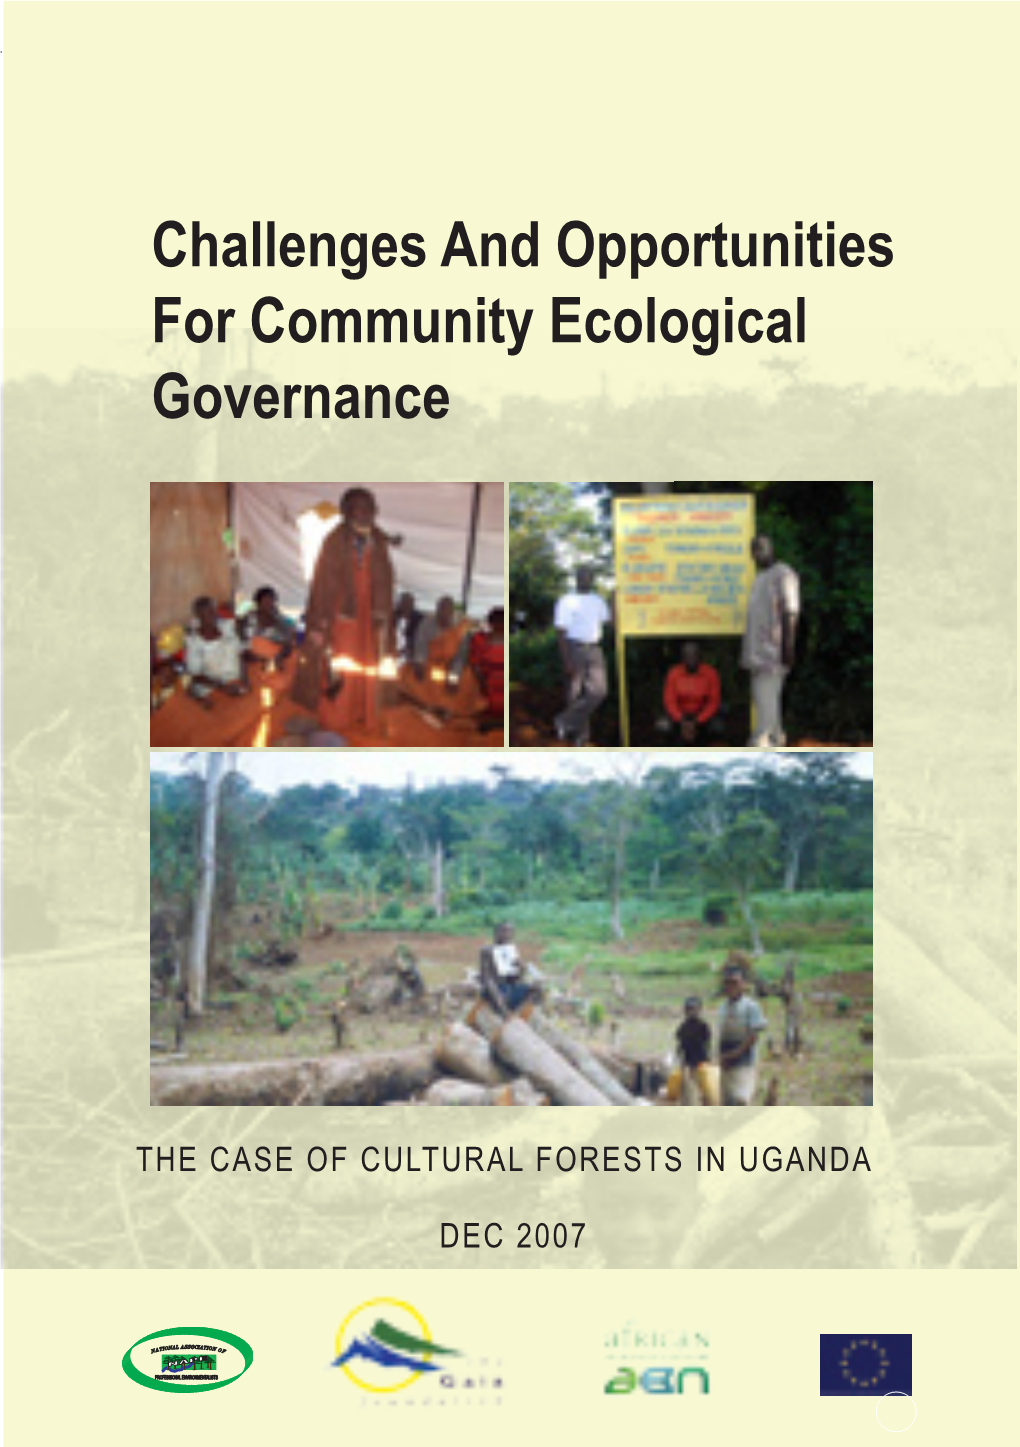 Challenges and Opportunities for Community Ecological Governance